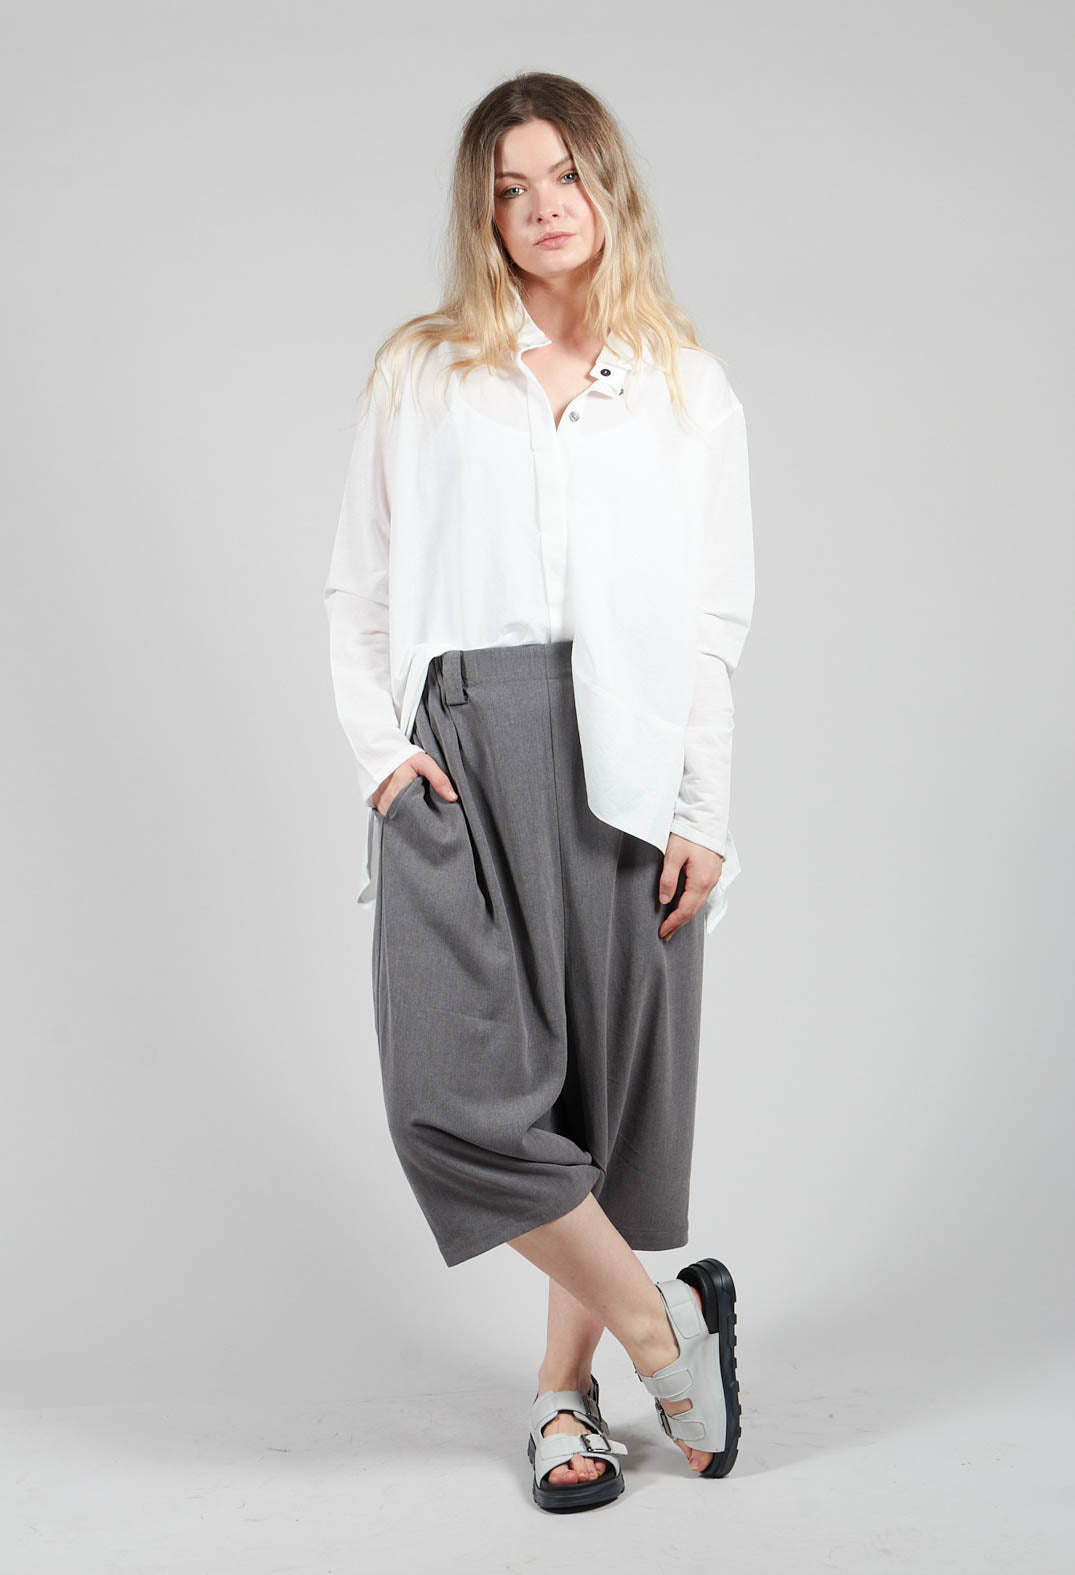 Culotte Style Trousers in Grey